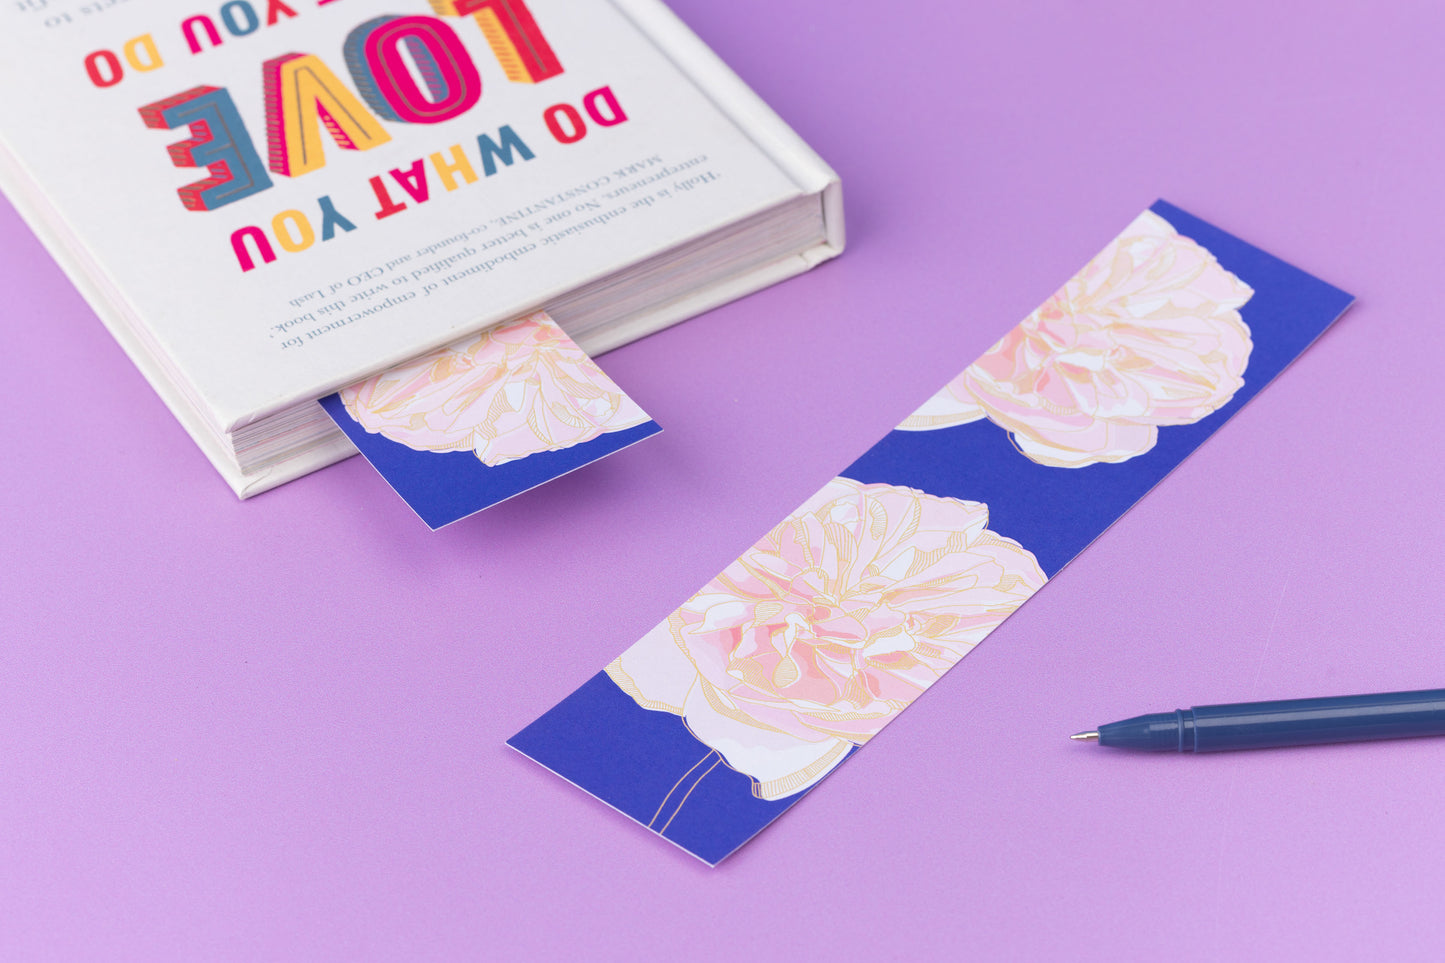 Spring Forward double-sided bookmark is lying, full colour pattern up, on a lilac desk.  To its left is a closed book with the same side of the bookmark sticking out of it.